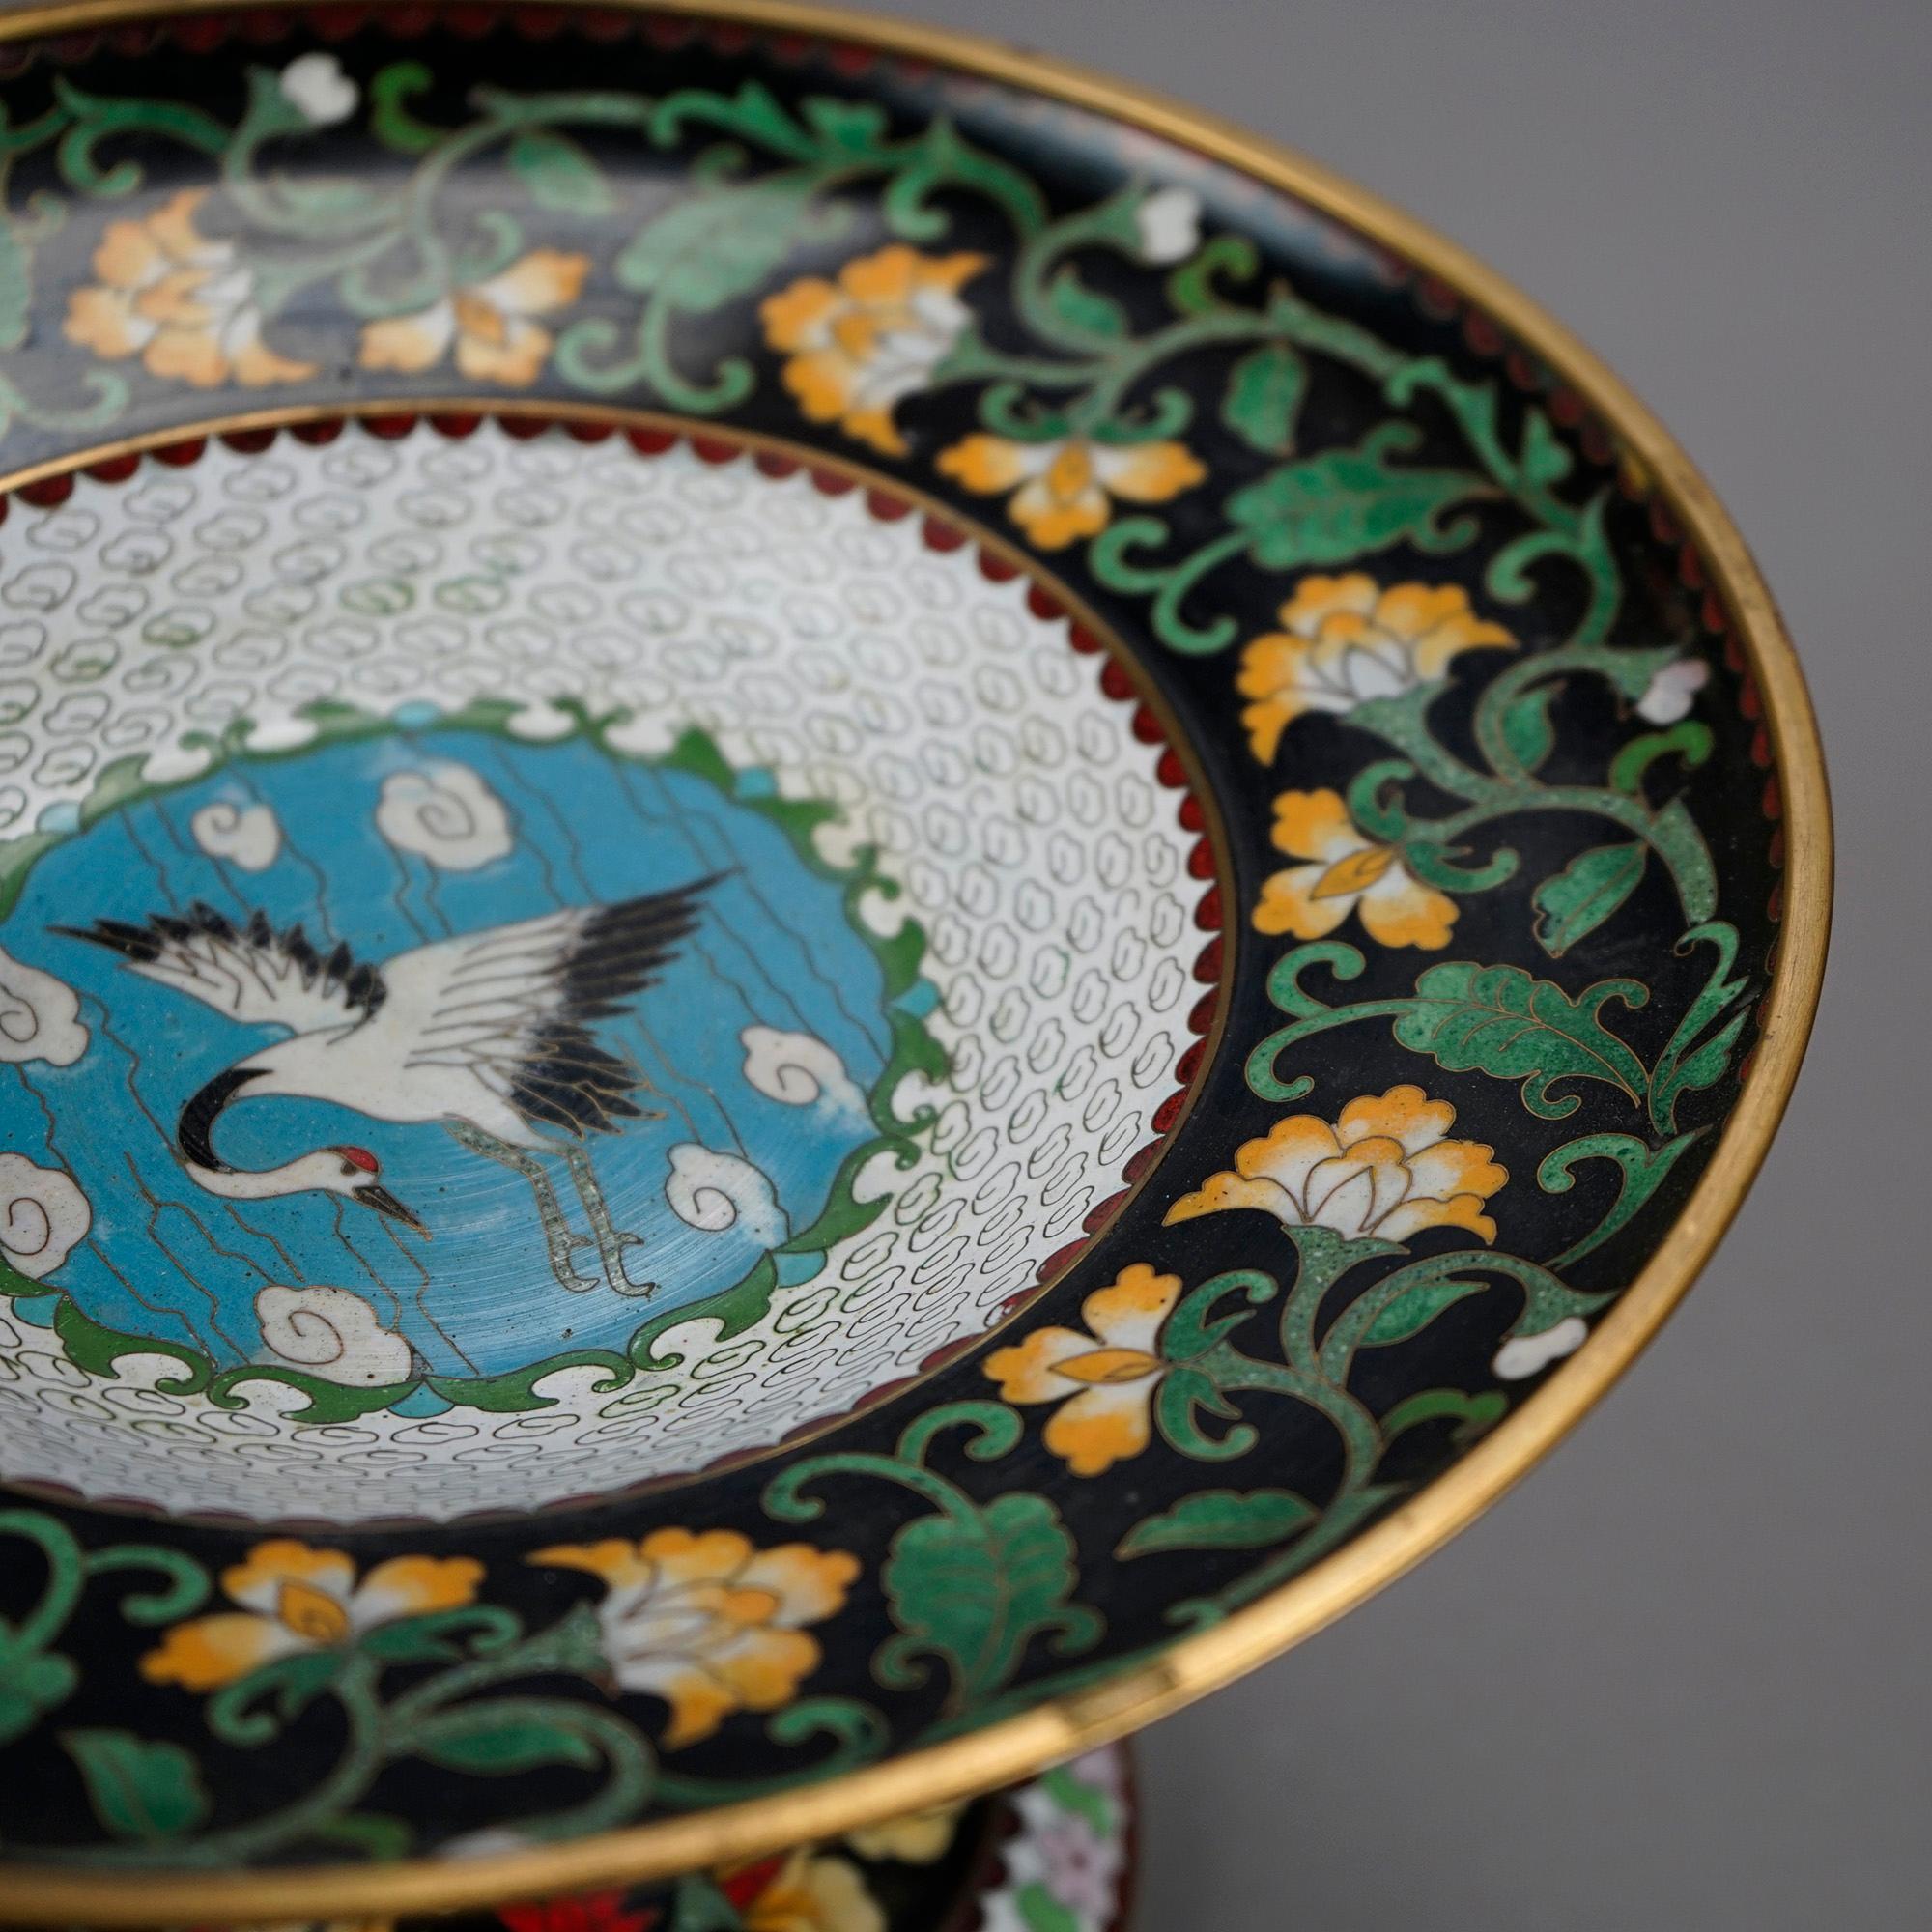 Metal Antique Chinese Cloisonné Enamel Decorated Swan Compote Circa 1930 For Sale